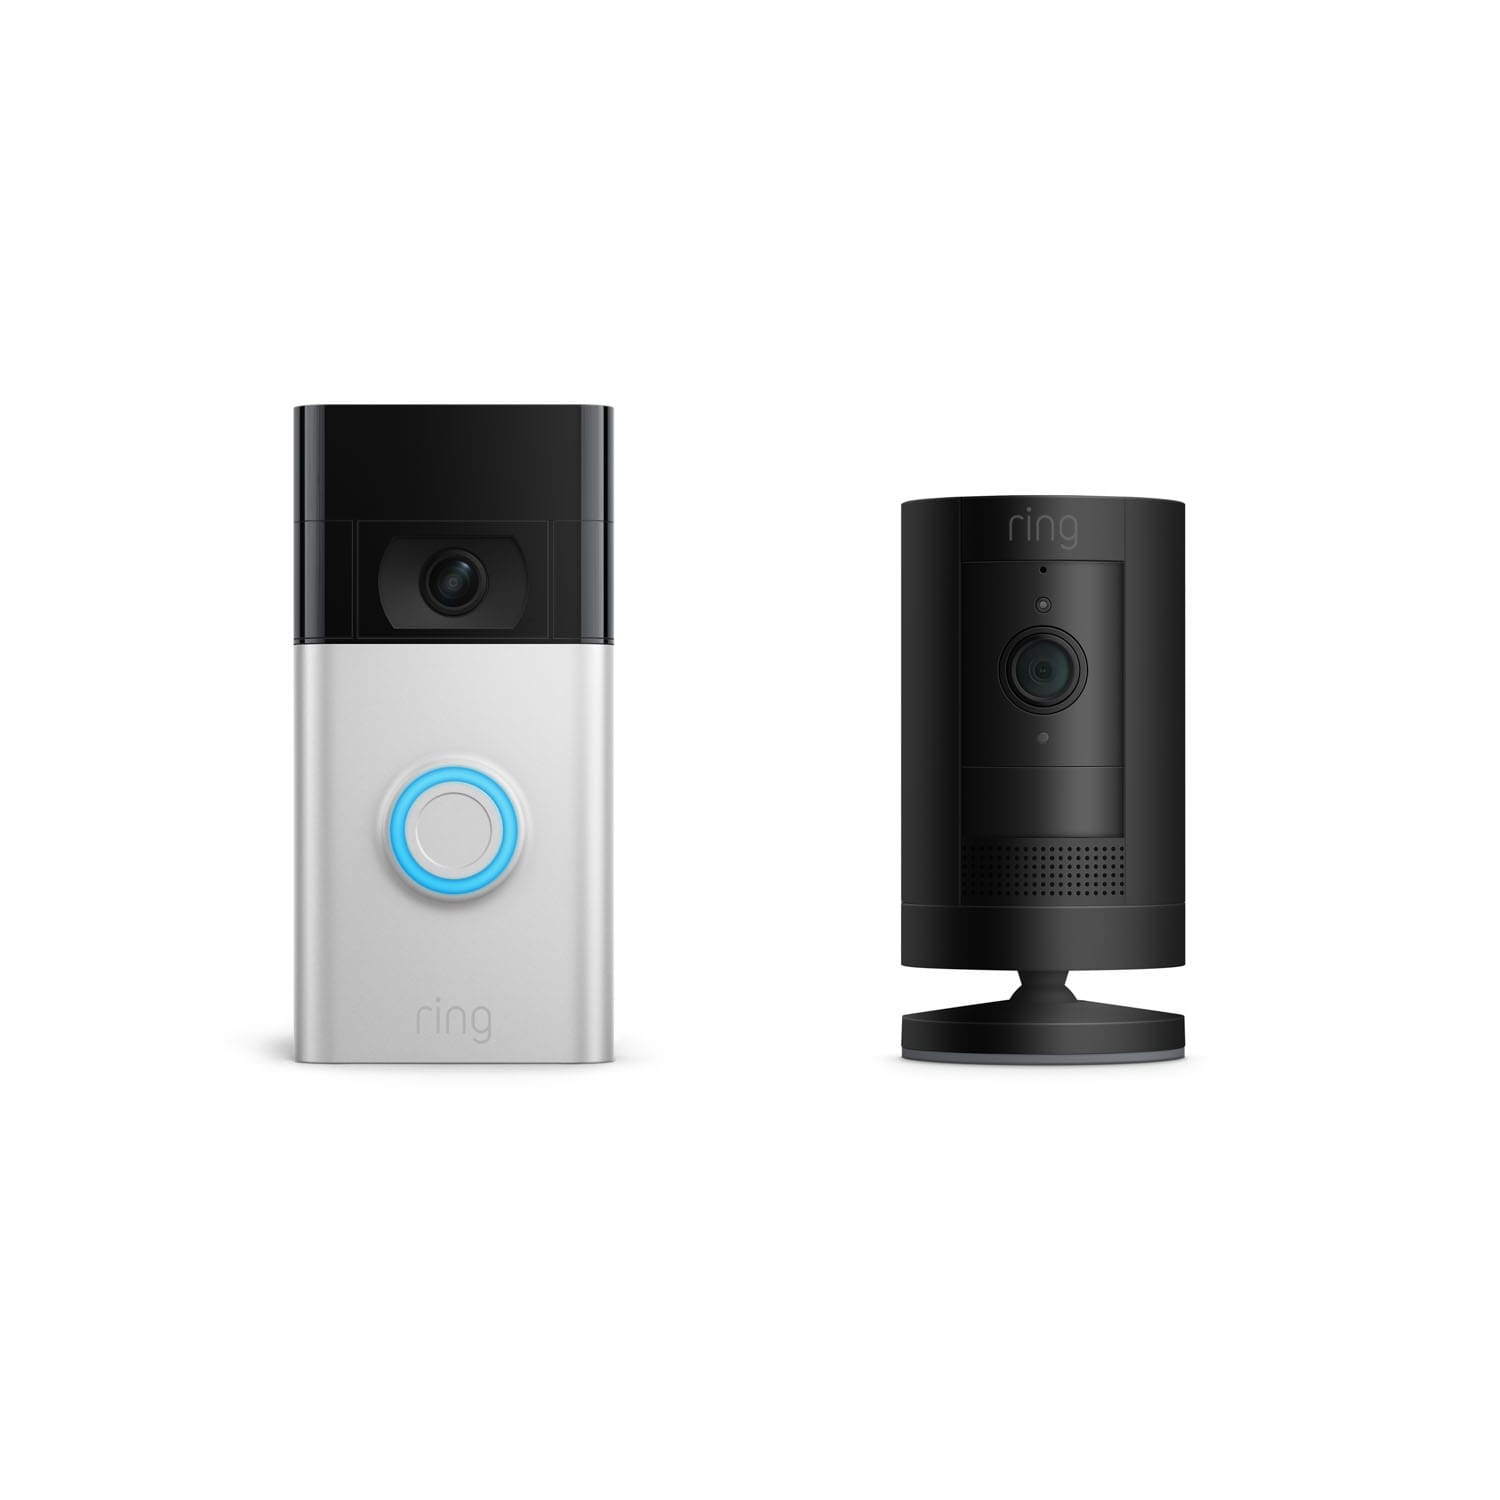 Connected Basic Kit (Video Doorbell (2nd Generation) + Stick Up Cam Battery) - Silver + Black:Connected Basic Kit (Video Doorbell (2nd Generation) + Stick Up Cam Battery)